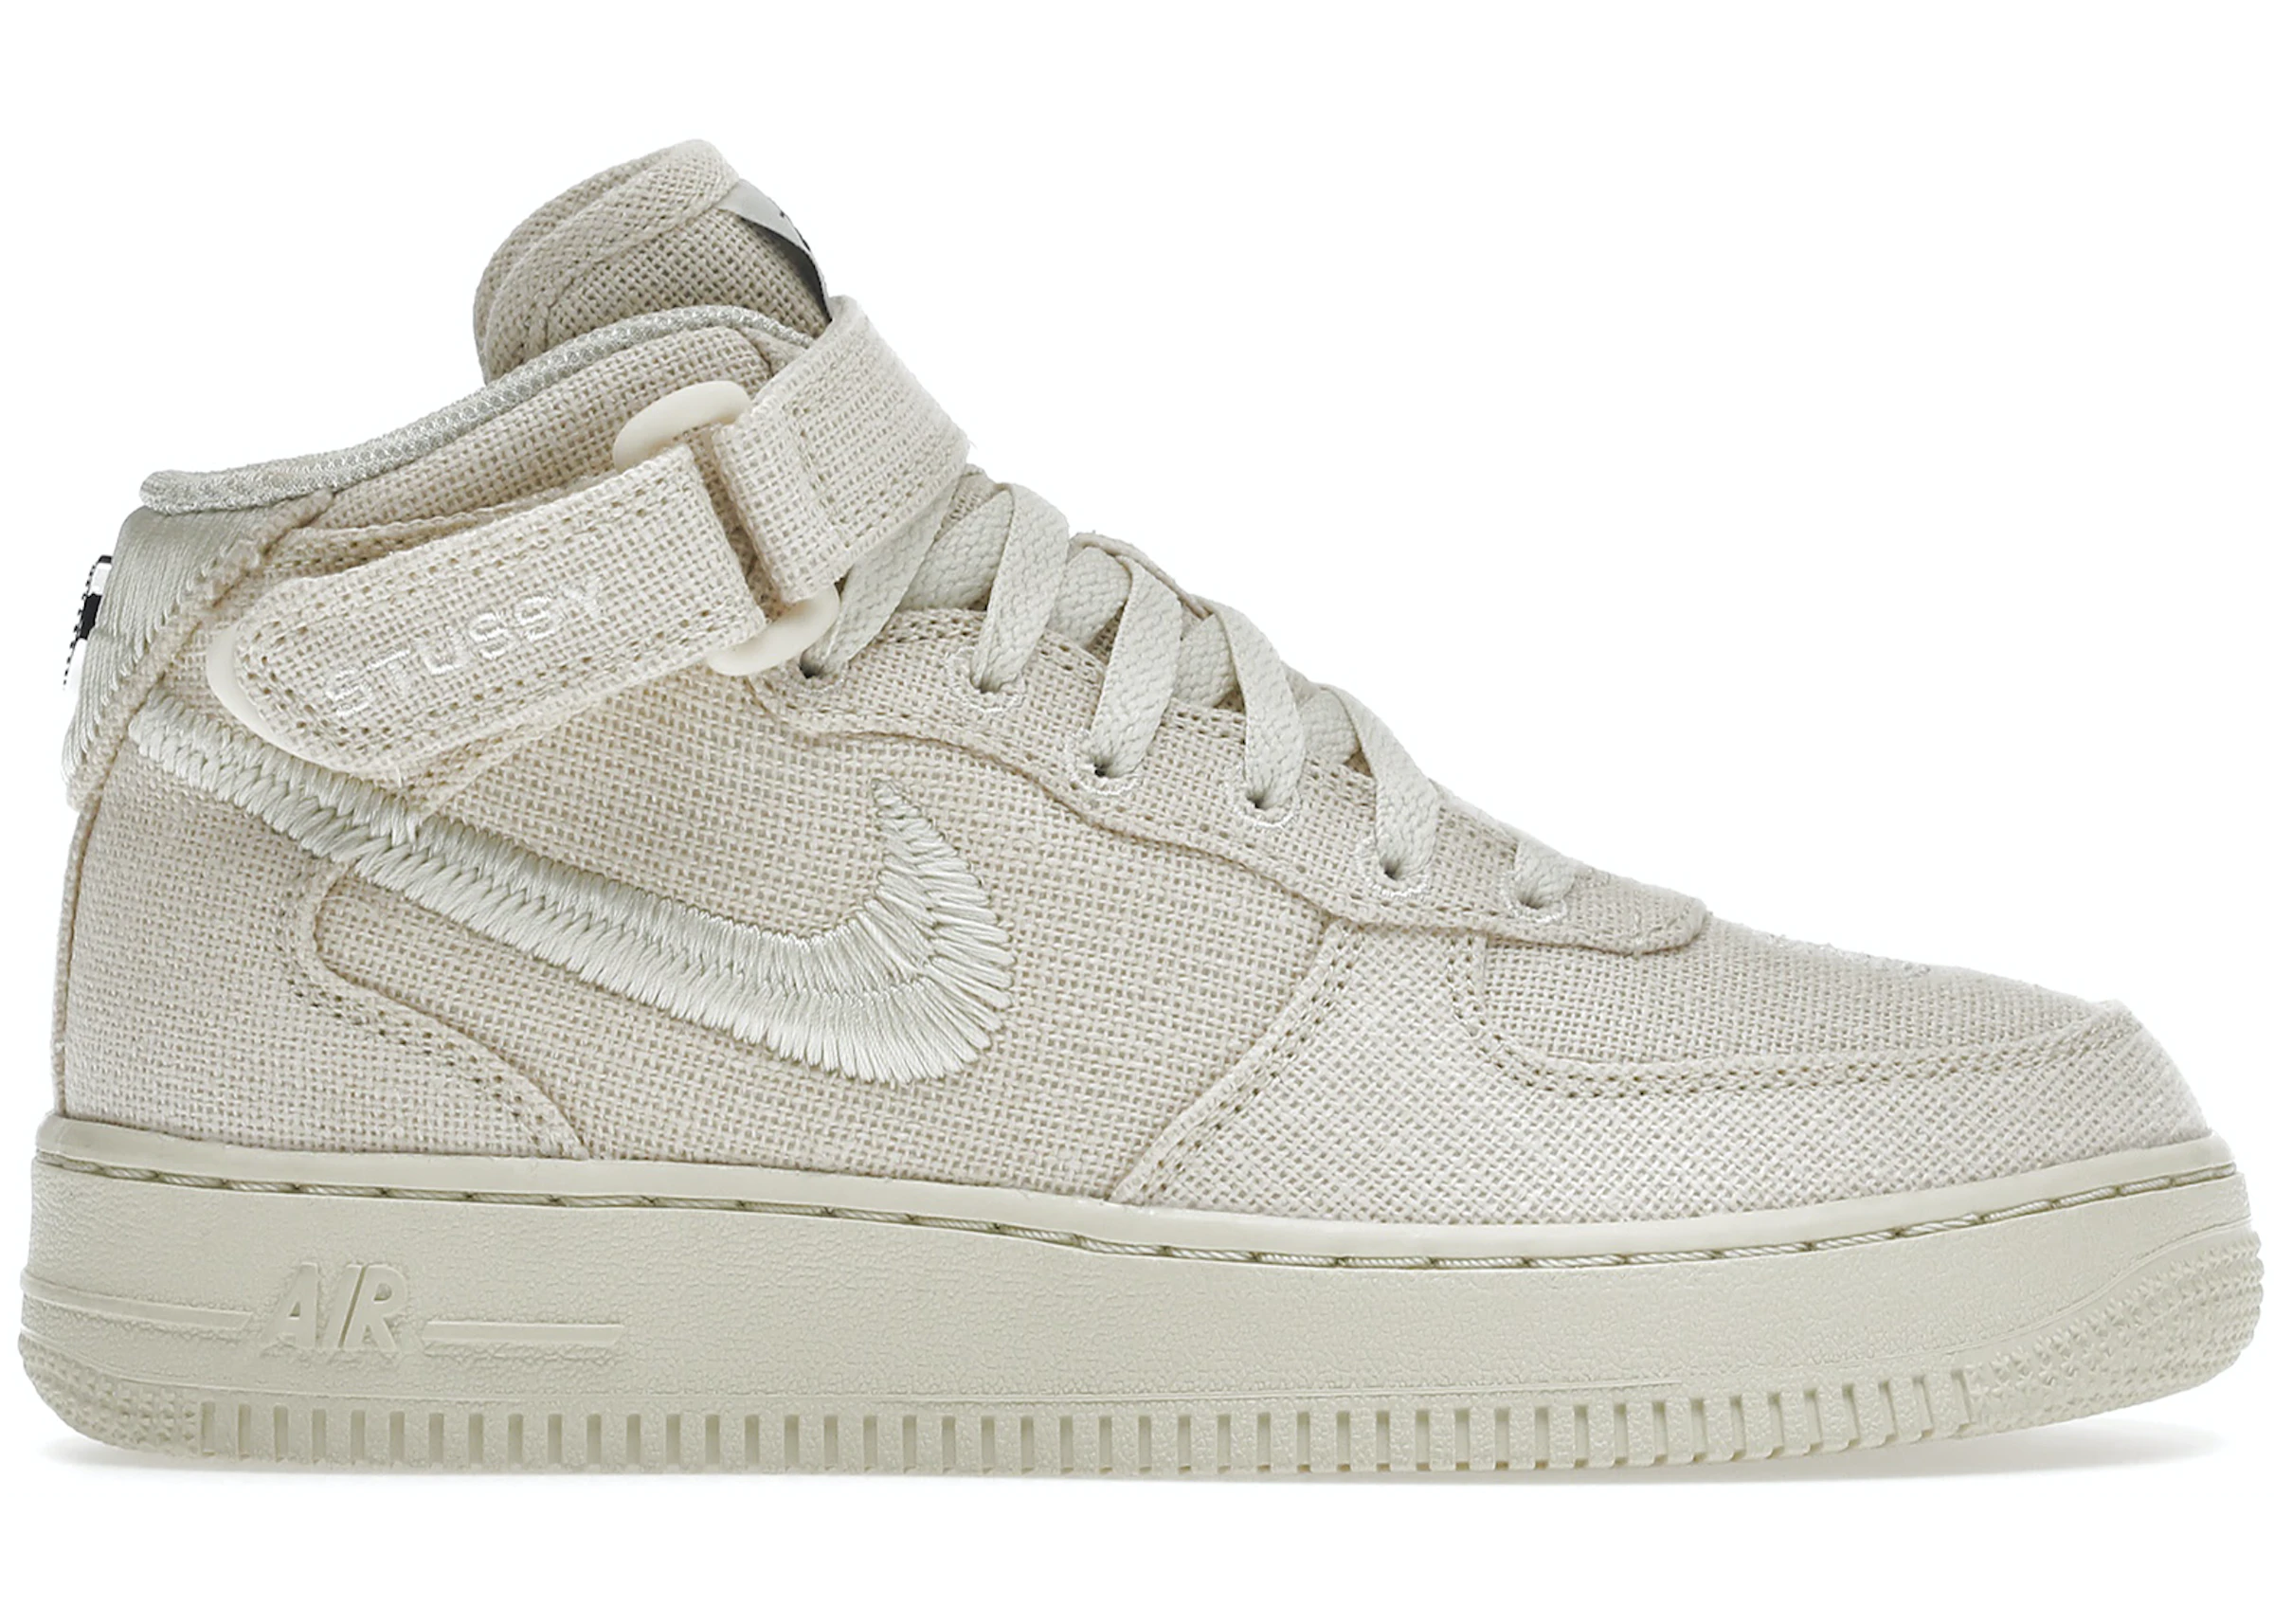 Buy Nike af1 reveal Air Force Shoes & New Sneakers - StockX